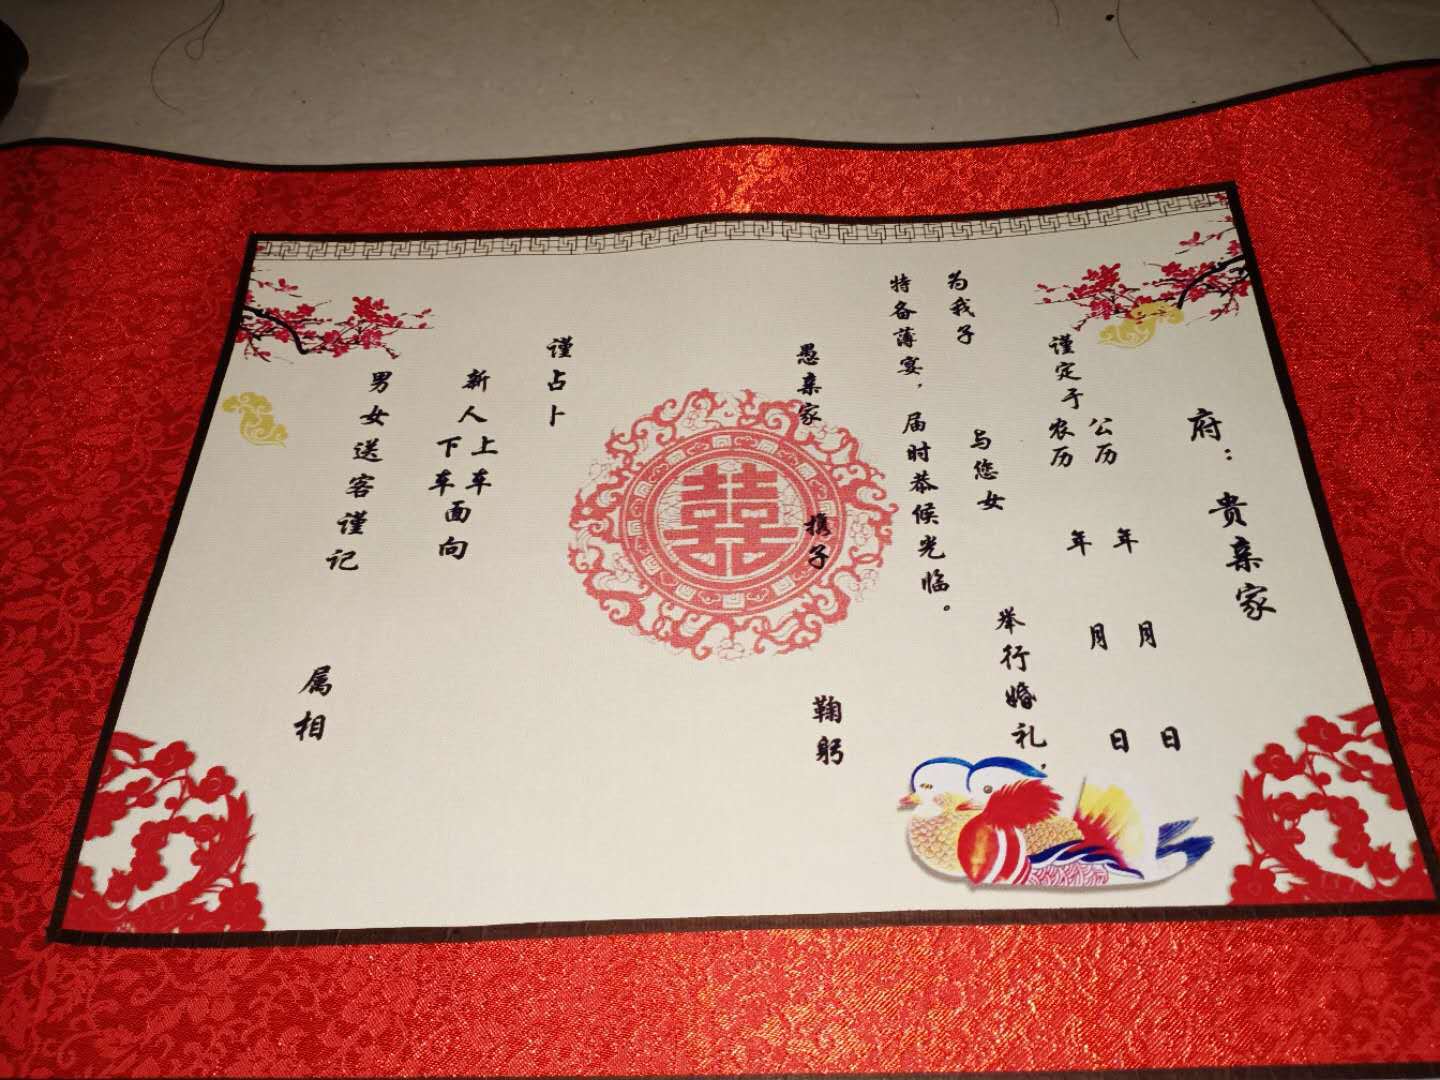 Knot Festive Sacred Order Scroll Marriage Certificate Order Marriage Certificate Letter of Appointment Wedding Gift Date Post Chinese Style Handwriting Personalized Creative